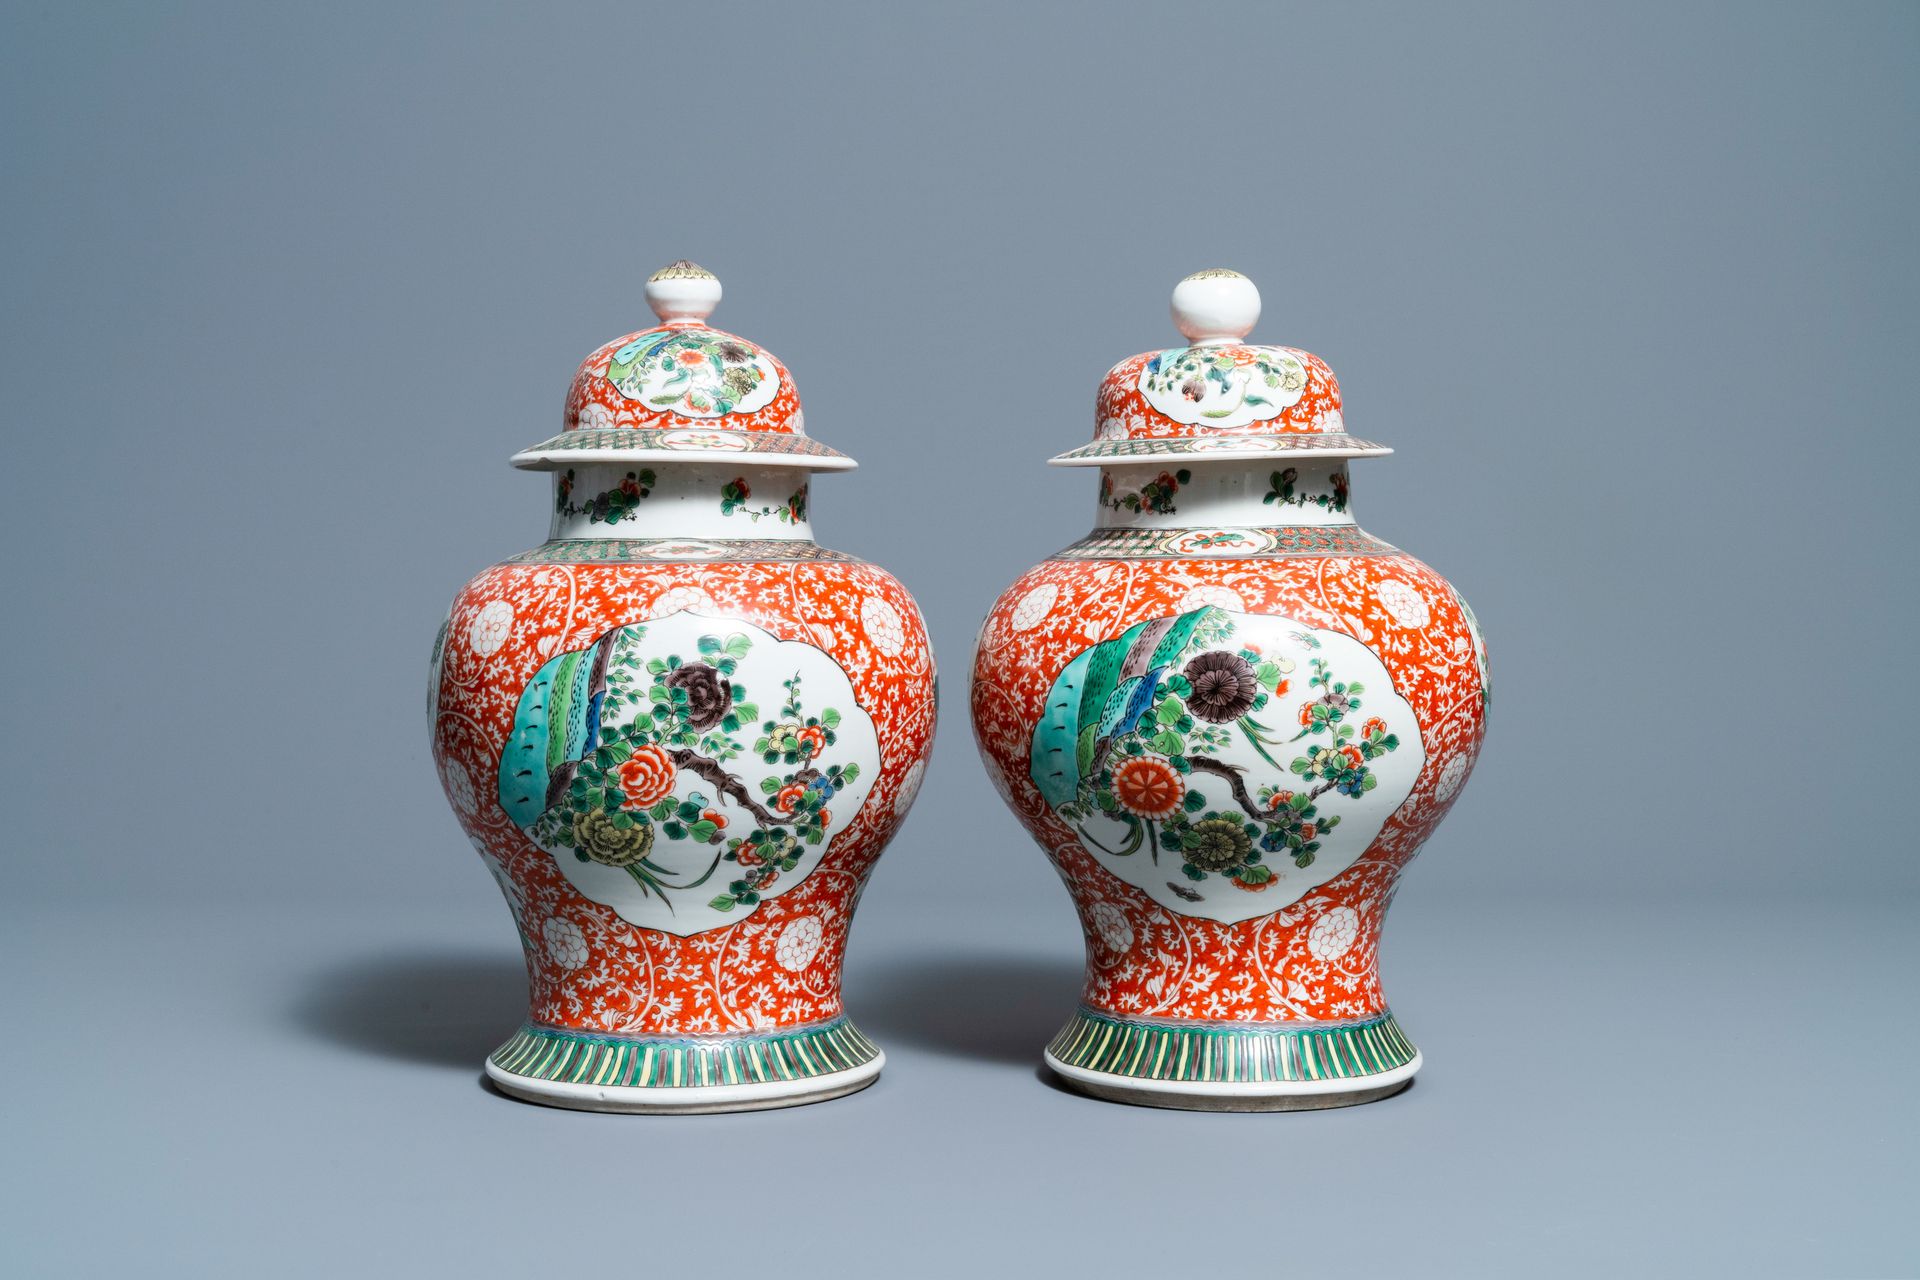 A pair of Chinese famille verte vases and covers, 19/20th C. 全名：一对中国花瓶和盖子，19/20世&hellip;